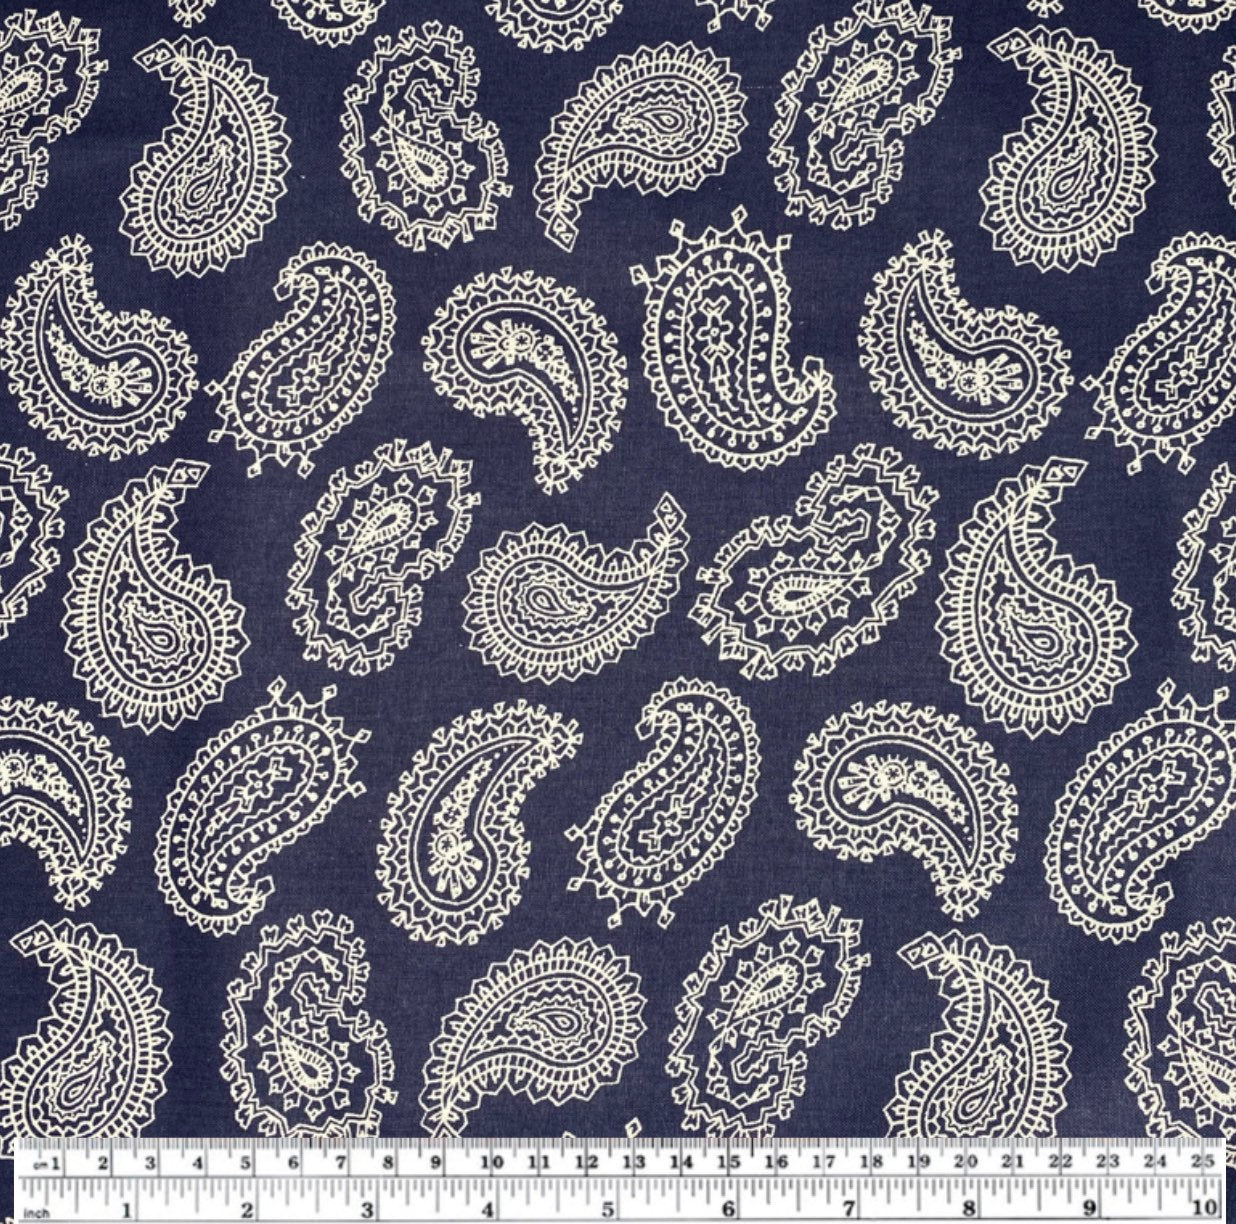 Quilting Cotton - Paisley - Navy/White